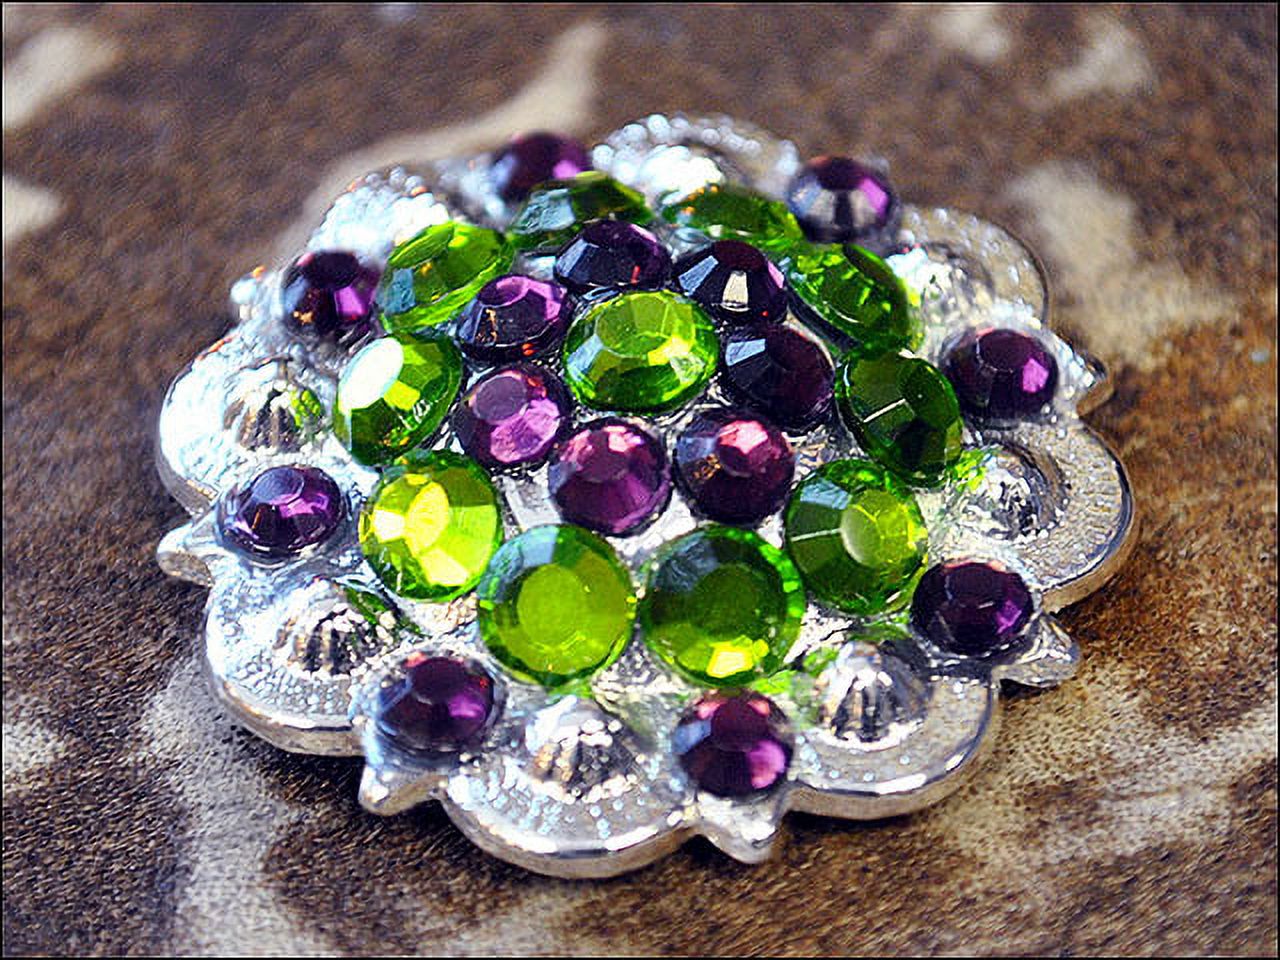 94HS Set Of 32 Screw Back Concho Peridot Amethyst Crystal 1-1/4In Saddle - image 5 of 7